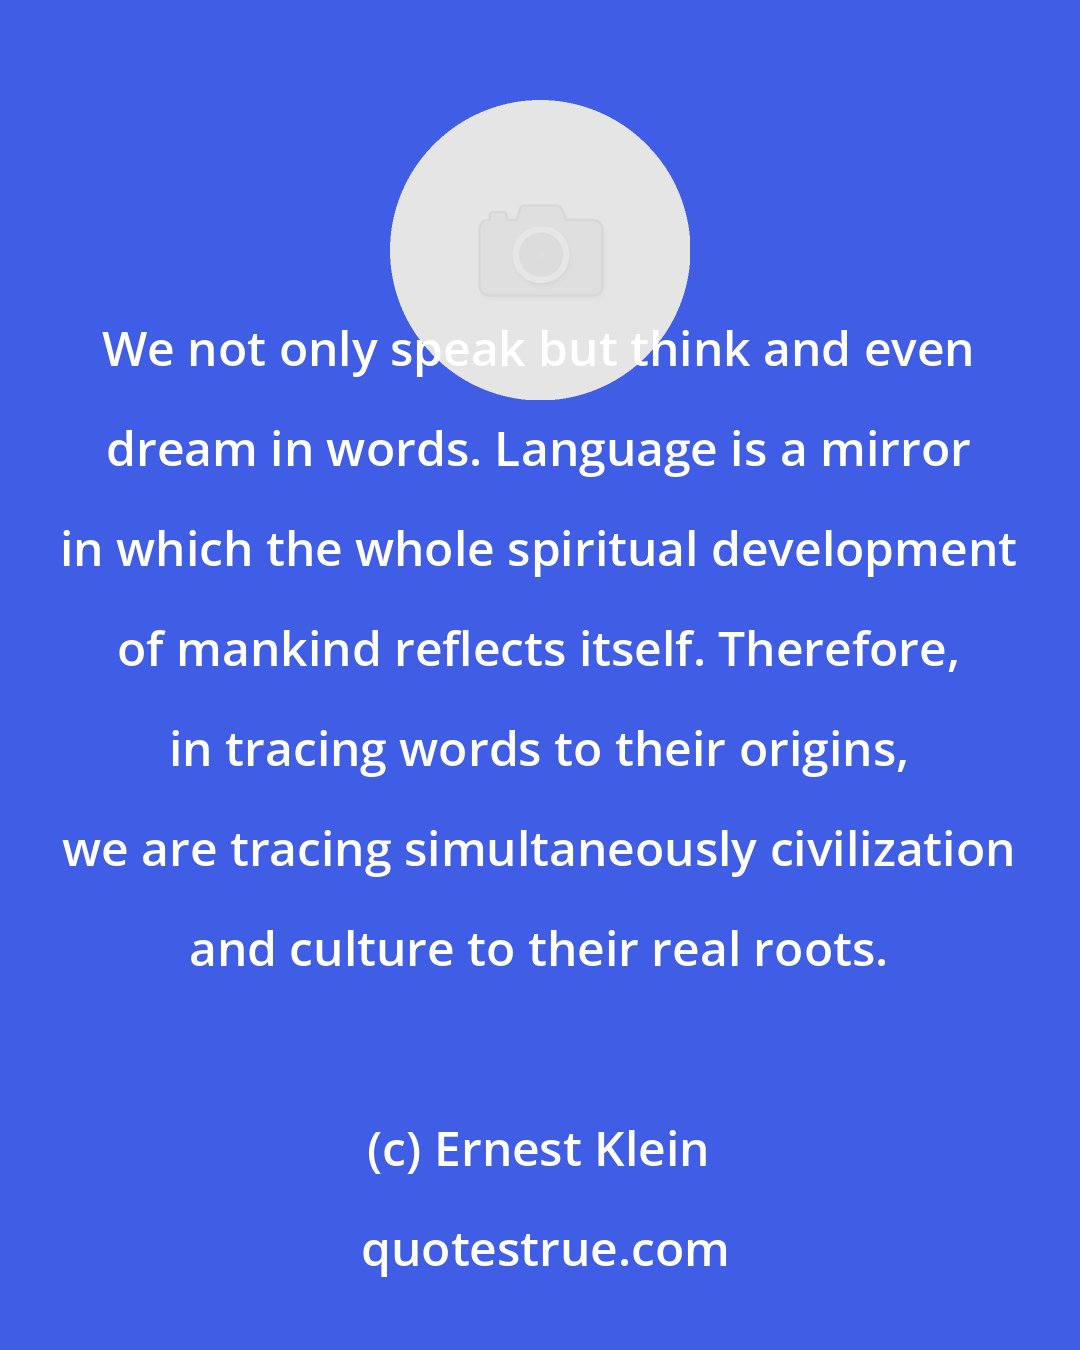 Ernest Klein: We not only speak but think and even dream in words. Language is a mirror in which the whole spiritual development of mankind reflects itself. Therefore, in tracing words to their origins, we are tracing simultaneously civilization and culture to their real roots.